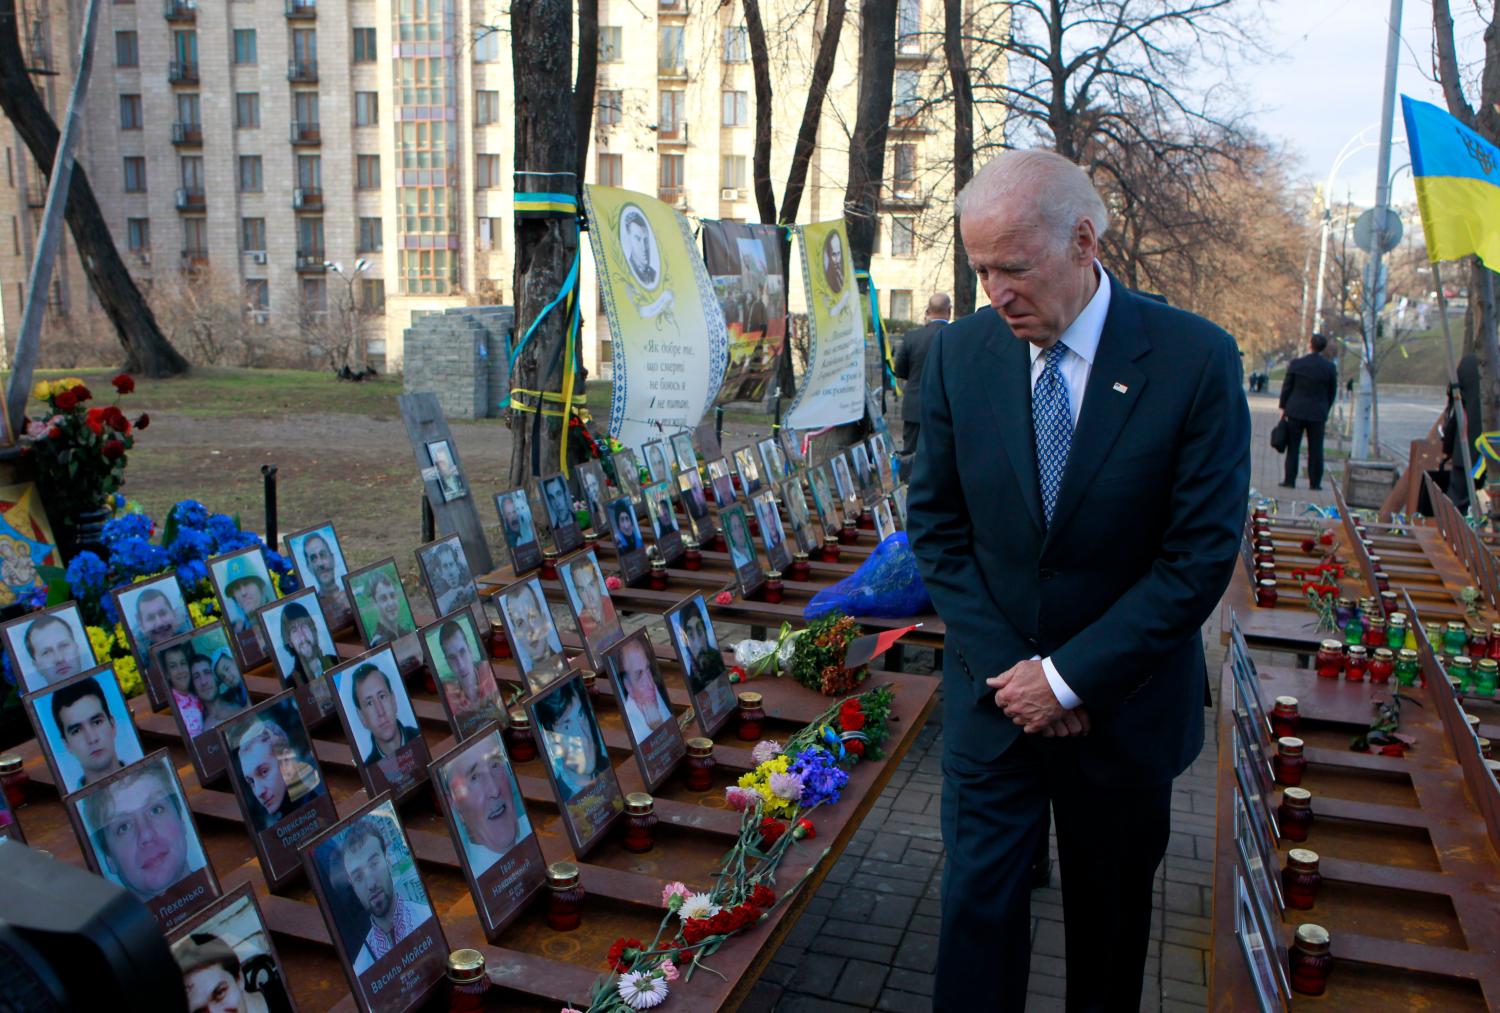 U.S. Vice President Joe Biden visits the monument to the so-called "Heavenly Sotnya" (Hundred) in Kiev, Ukraine, December 7, 2015. The monument was erected to commemorate the fallen demonstrators who were killed during the EuroMaidan protests in 2014. REUTERS/Sergei Chuzavkov/Pool